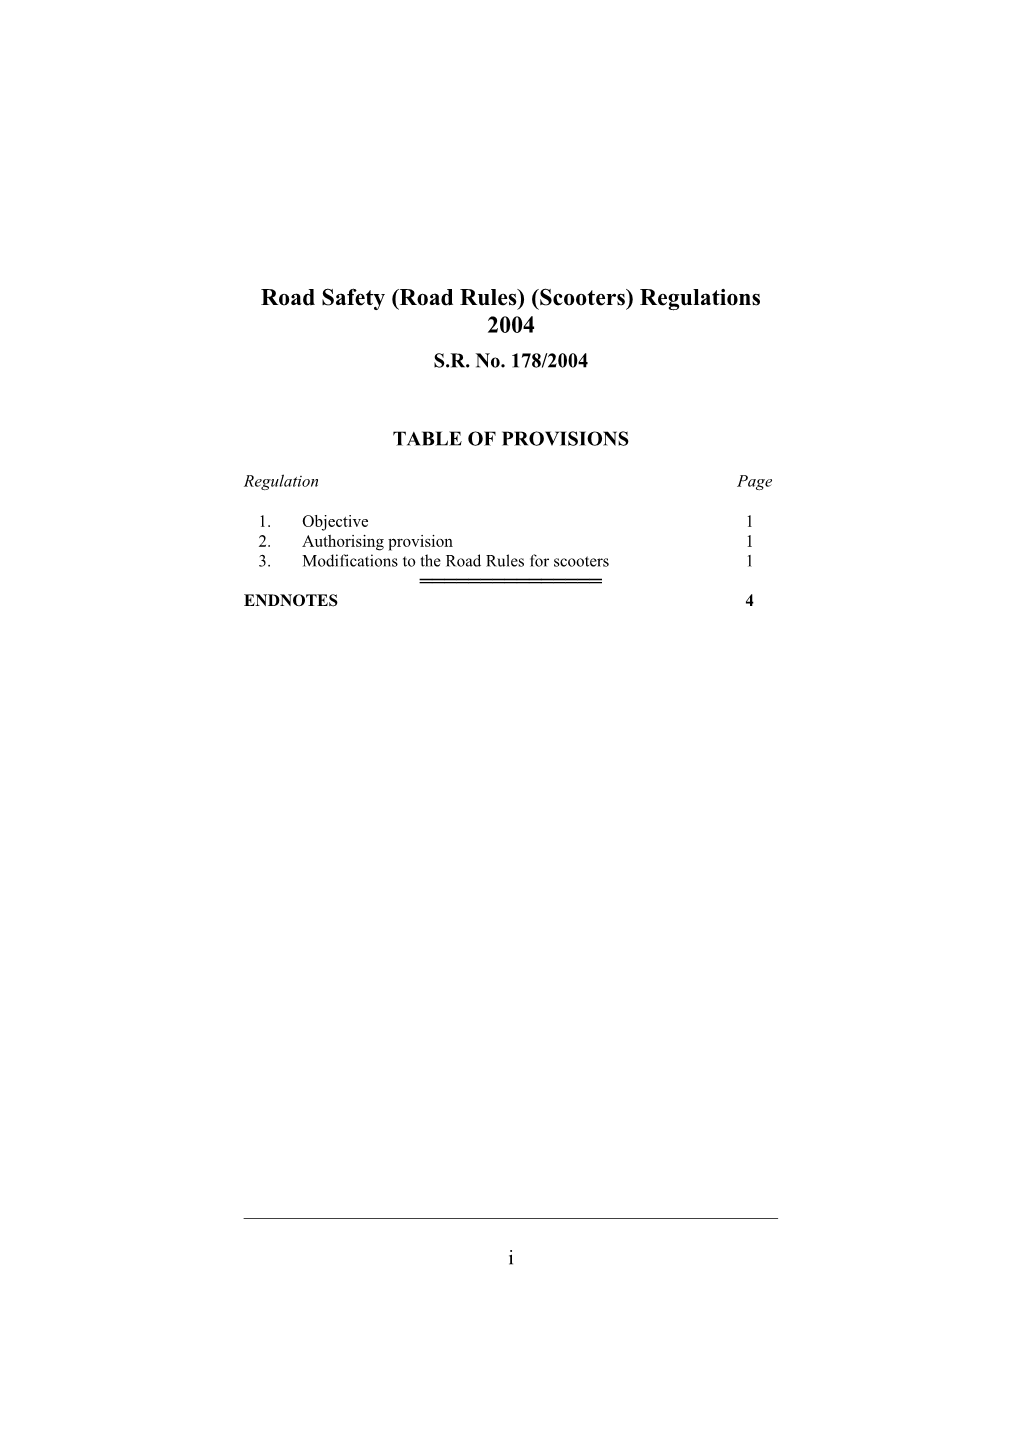 Road Safety (Road Rules) (Scooters) Regulations 2004